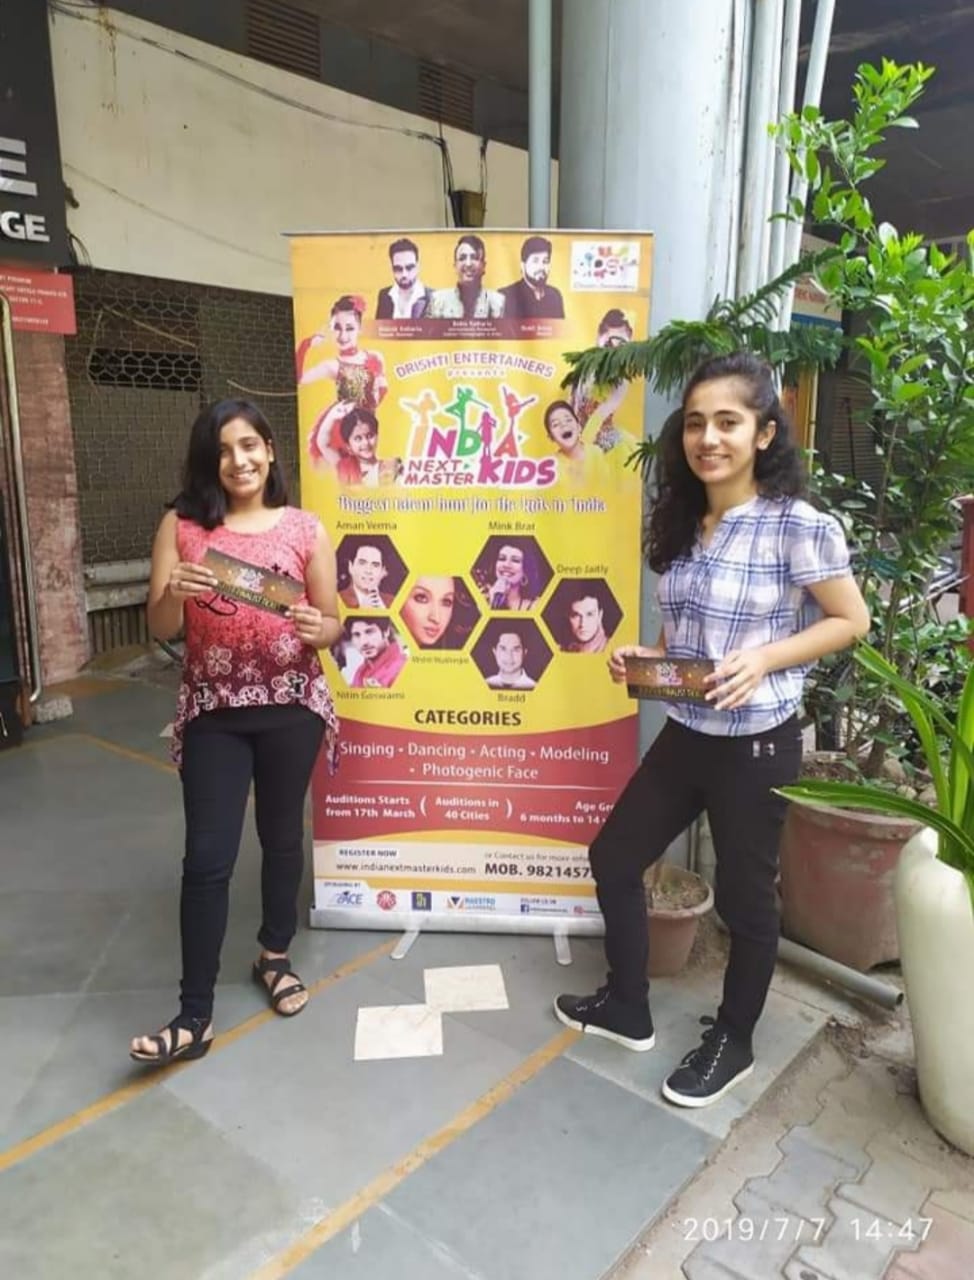 Euphonic Sisters make City Proud at India Next Master Kid Contest